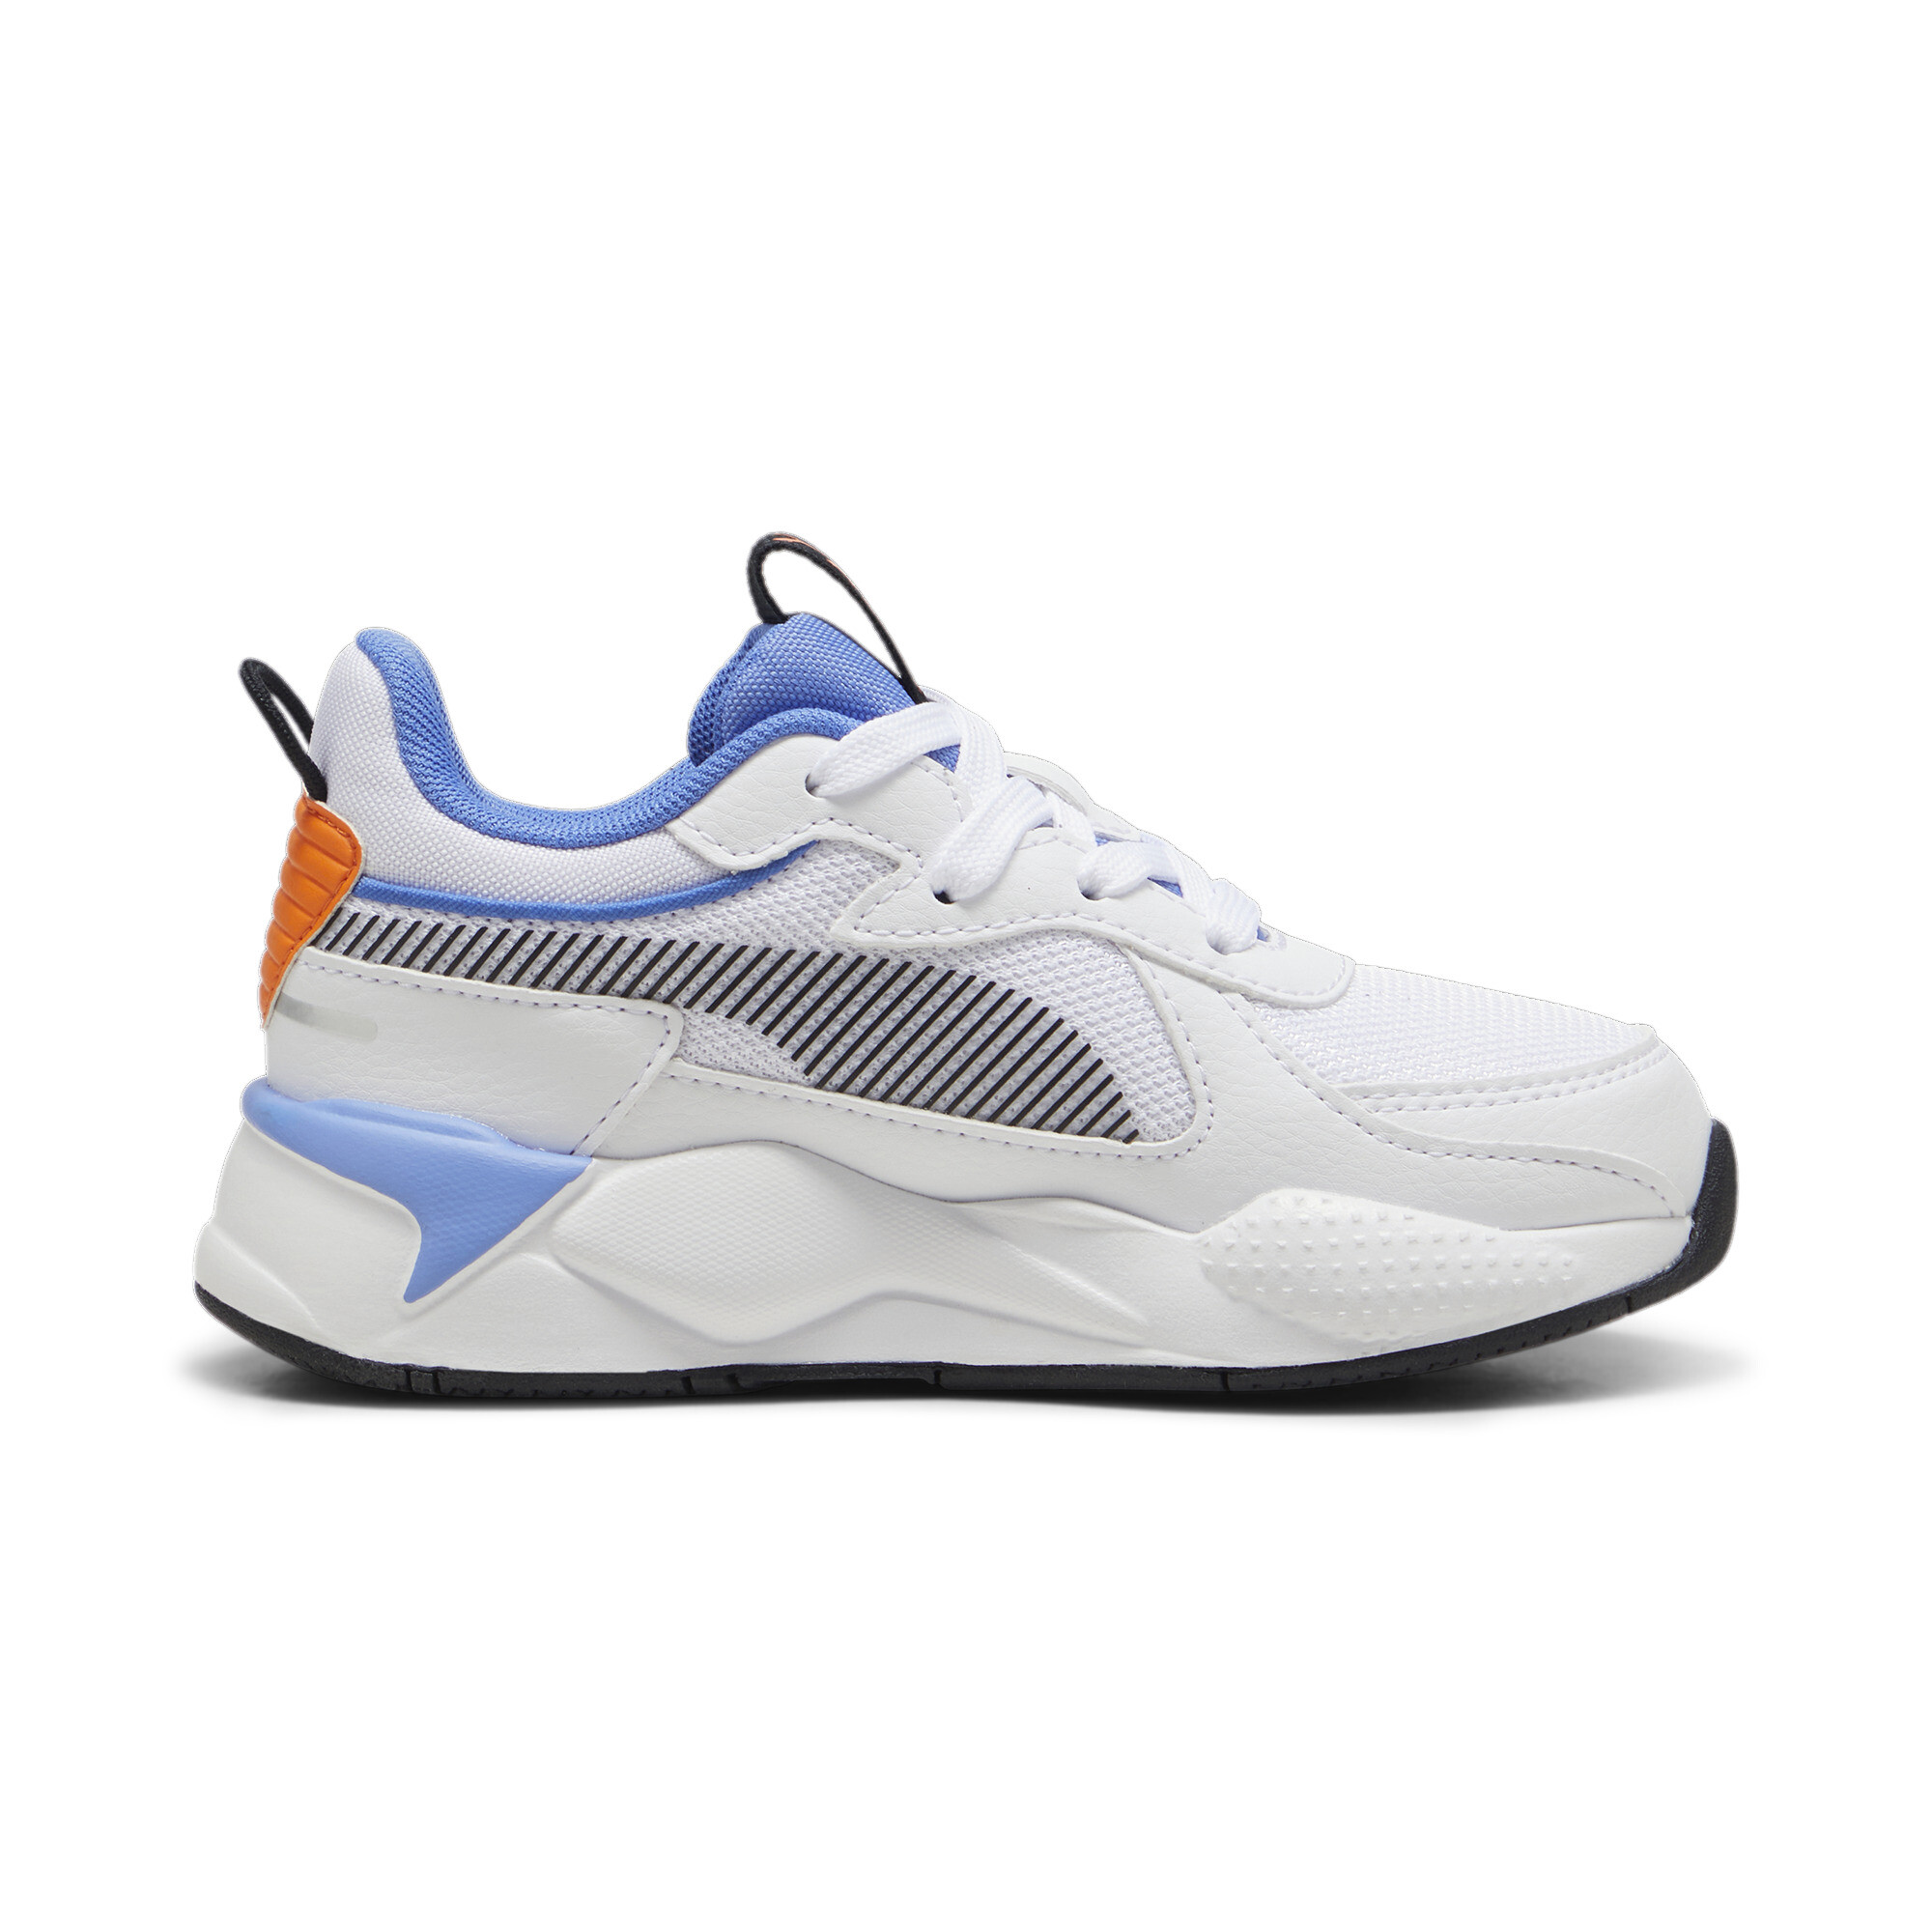 Puma RS-X Kids' Sneakers, White, Size 31, Shoes